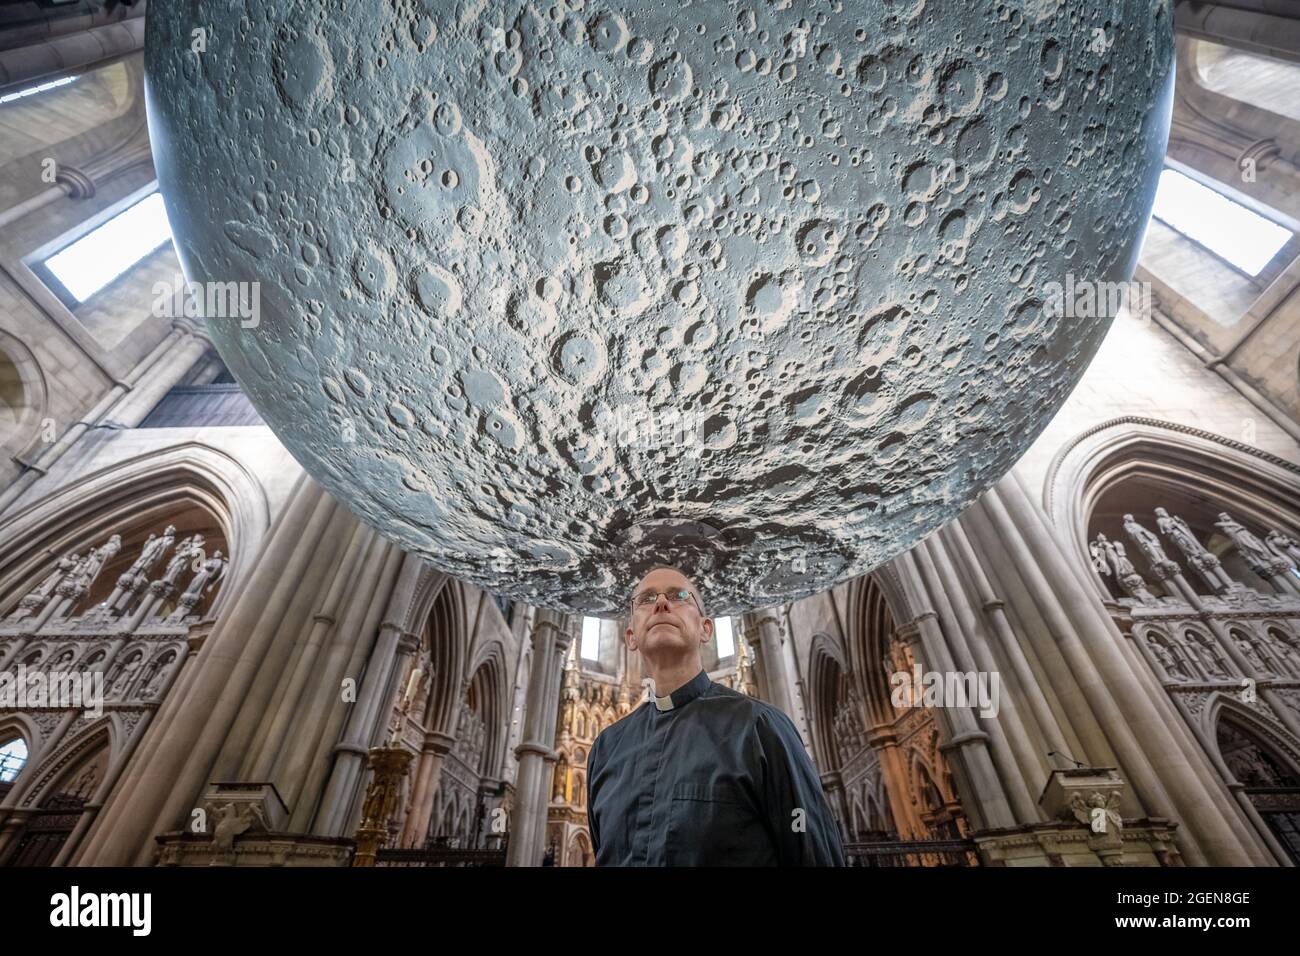 Resident Vicar, James Heard, stands with Museum of the Moon installation by artist Luke Jerram at St.John the Baptist church in west London, UK. Stock Photo